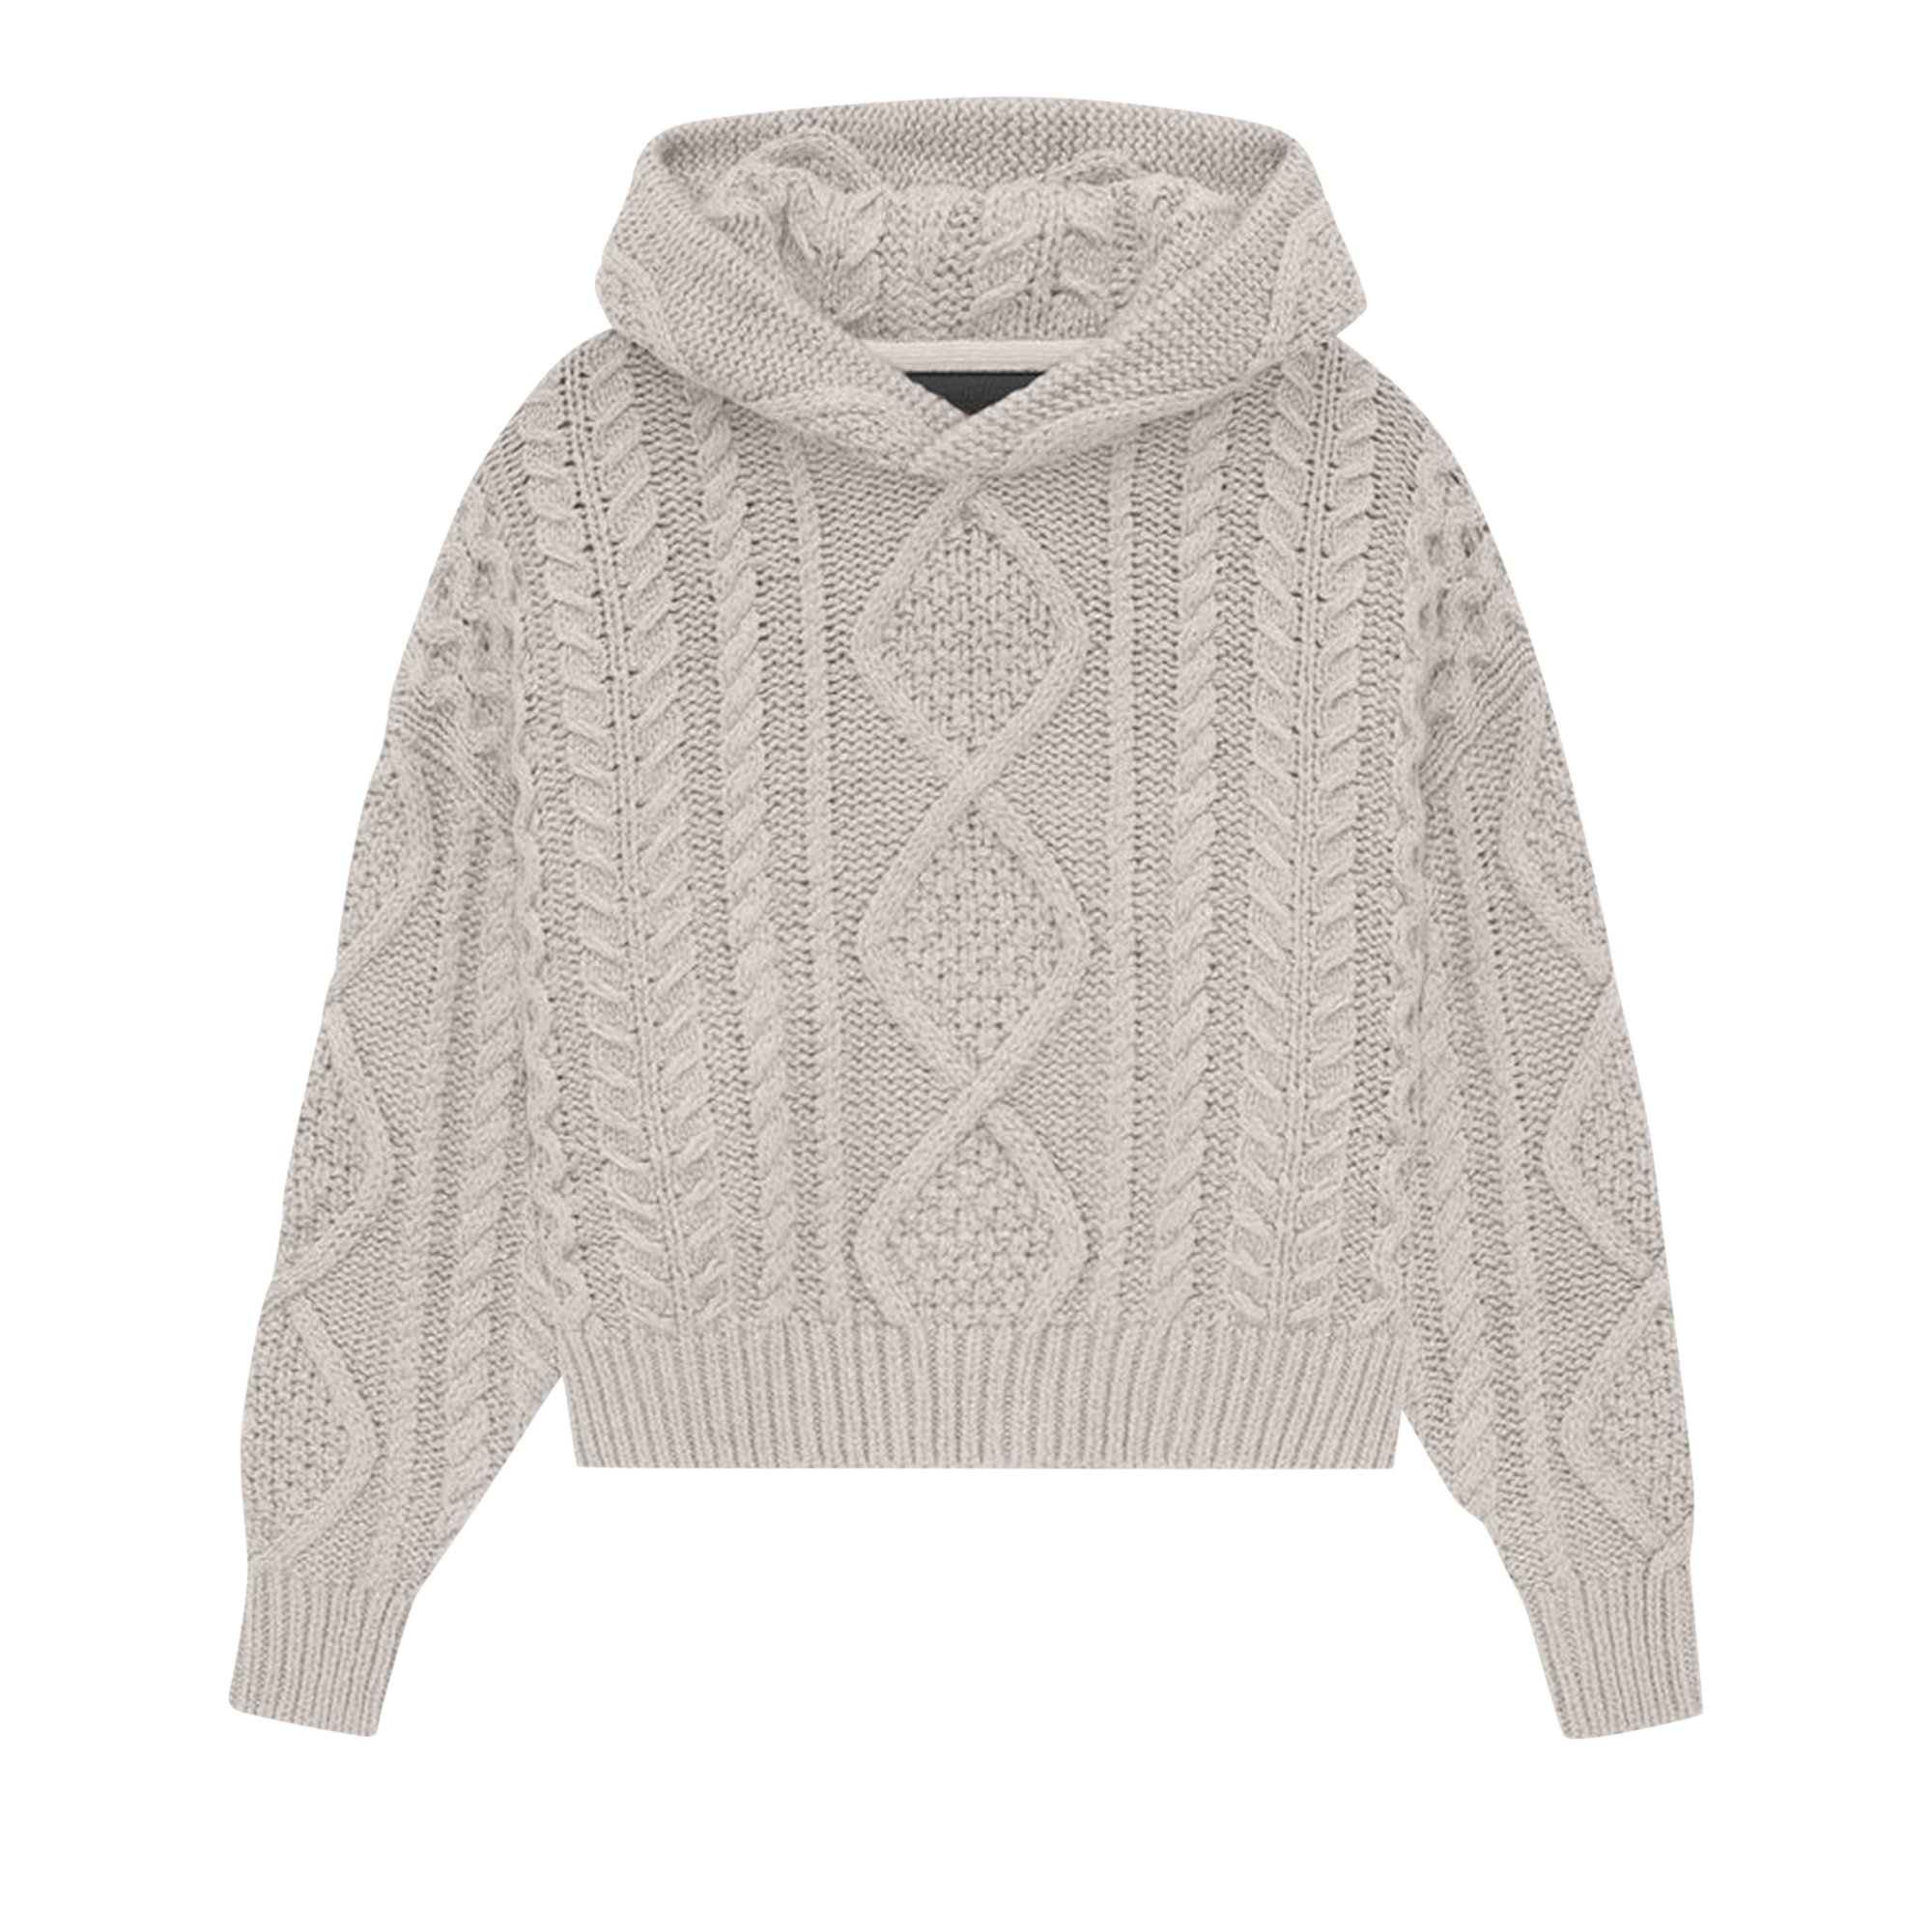 Buy Fear of God Essentials Kids Cable Knit Hoodie 'Silver Cloud